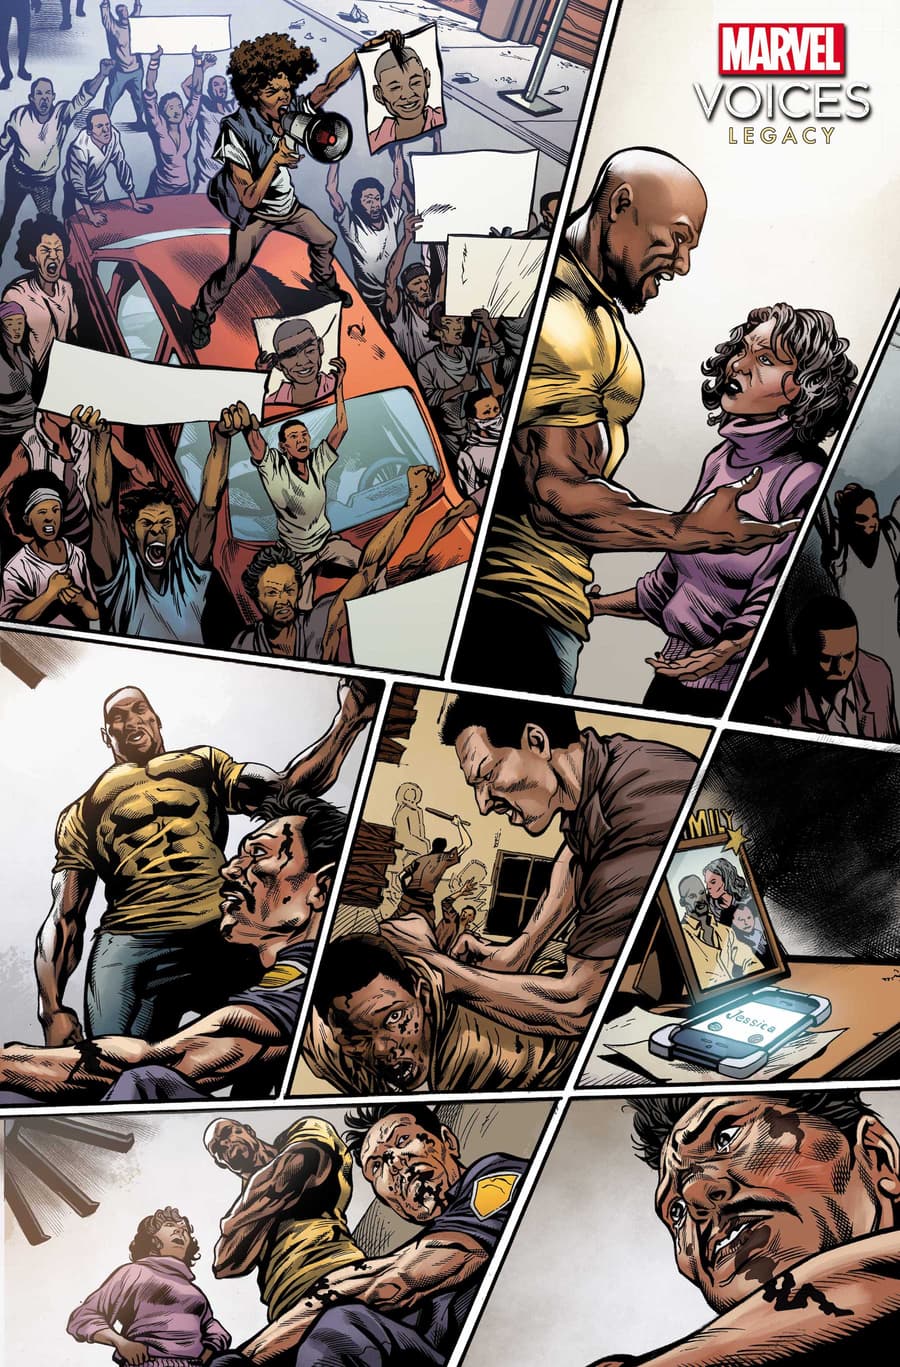 MARVEL'S VOICES: LEGACY #1 preview art by Sean Damien Hill, inks by Le Beau Underwood, colors by Rachelle Rosenberg